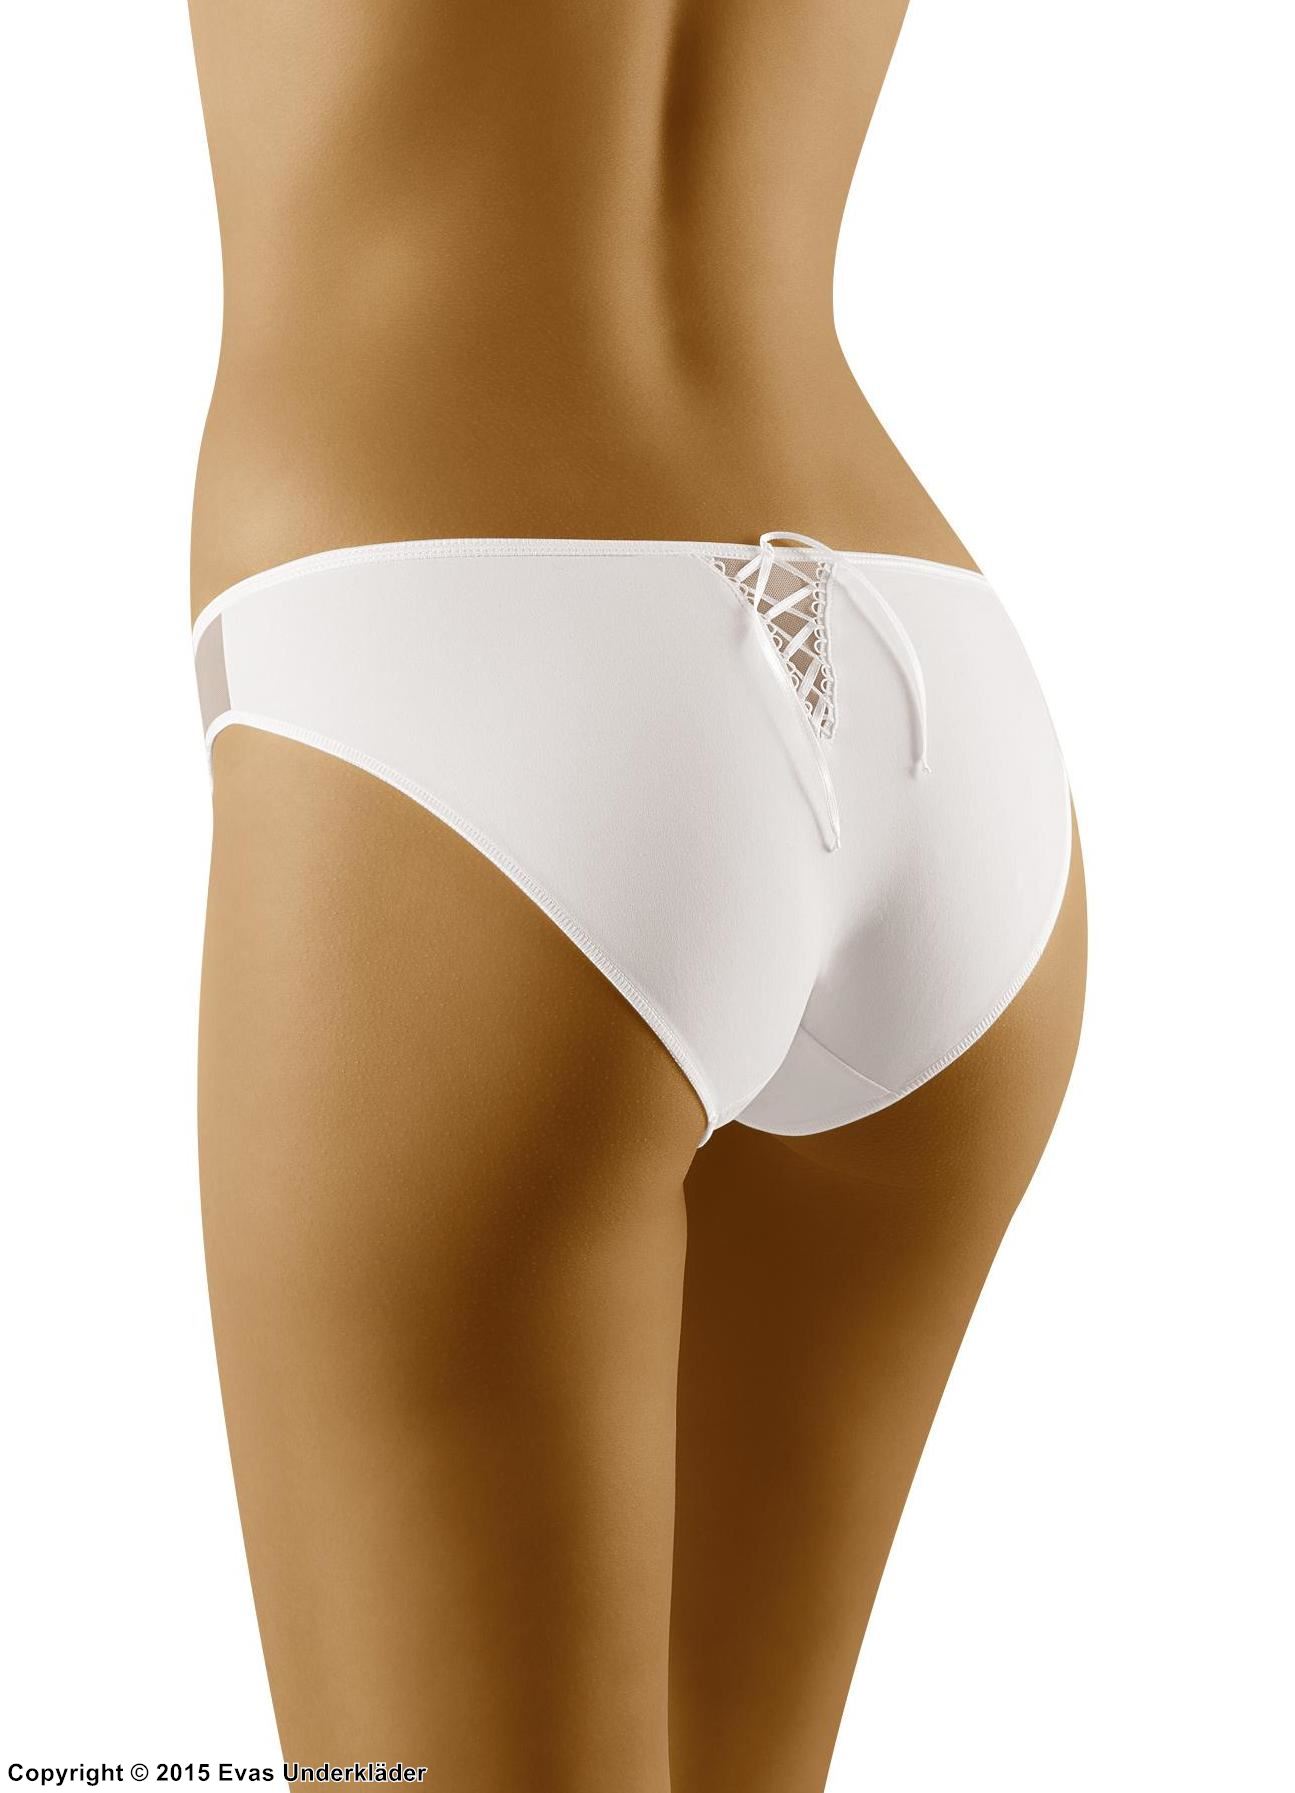 Classic briefs, high quality microfiber, embroidery, lacing